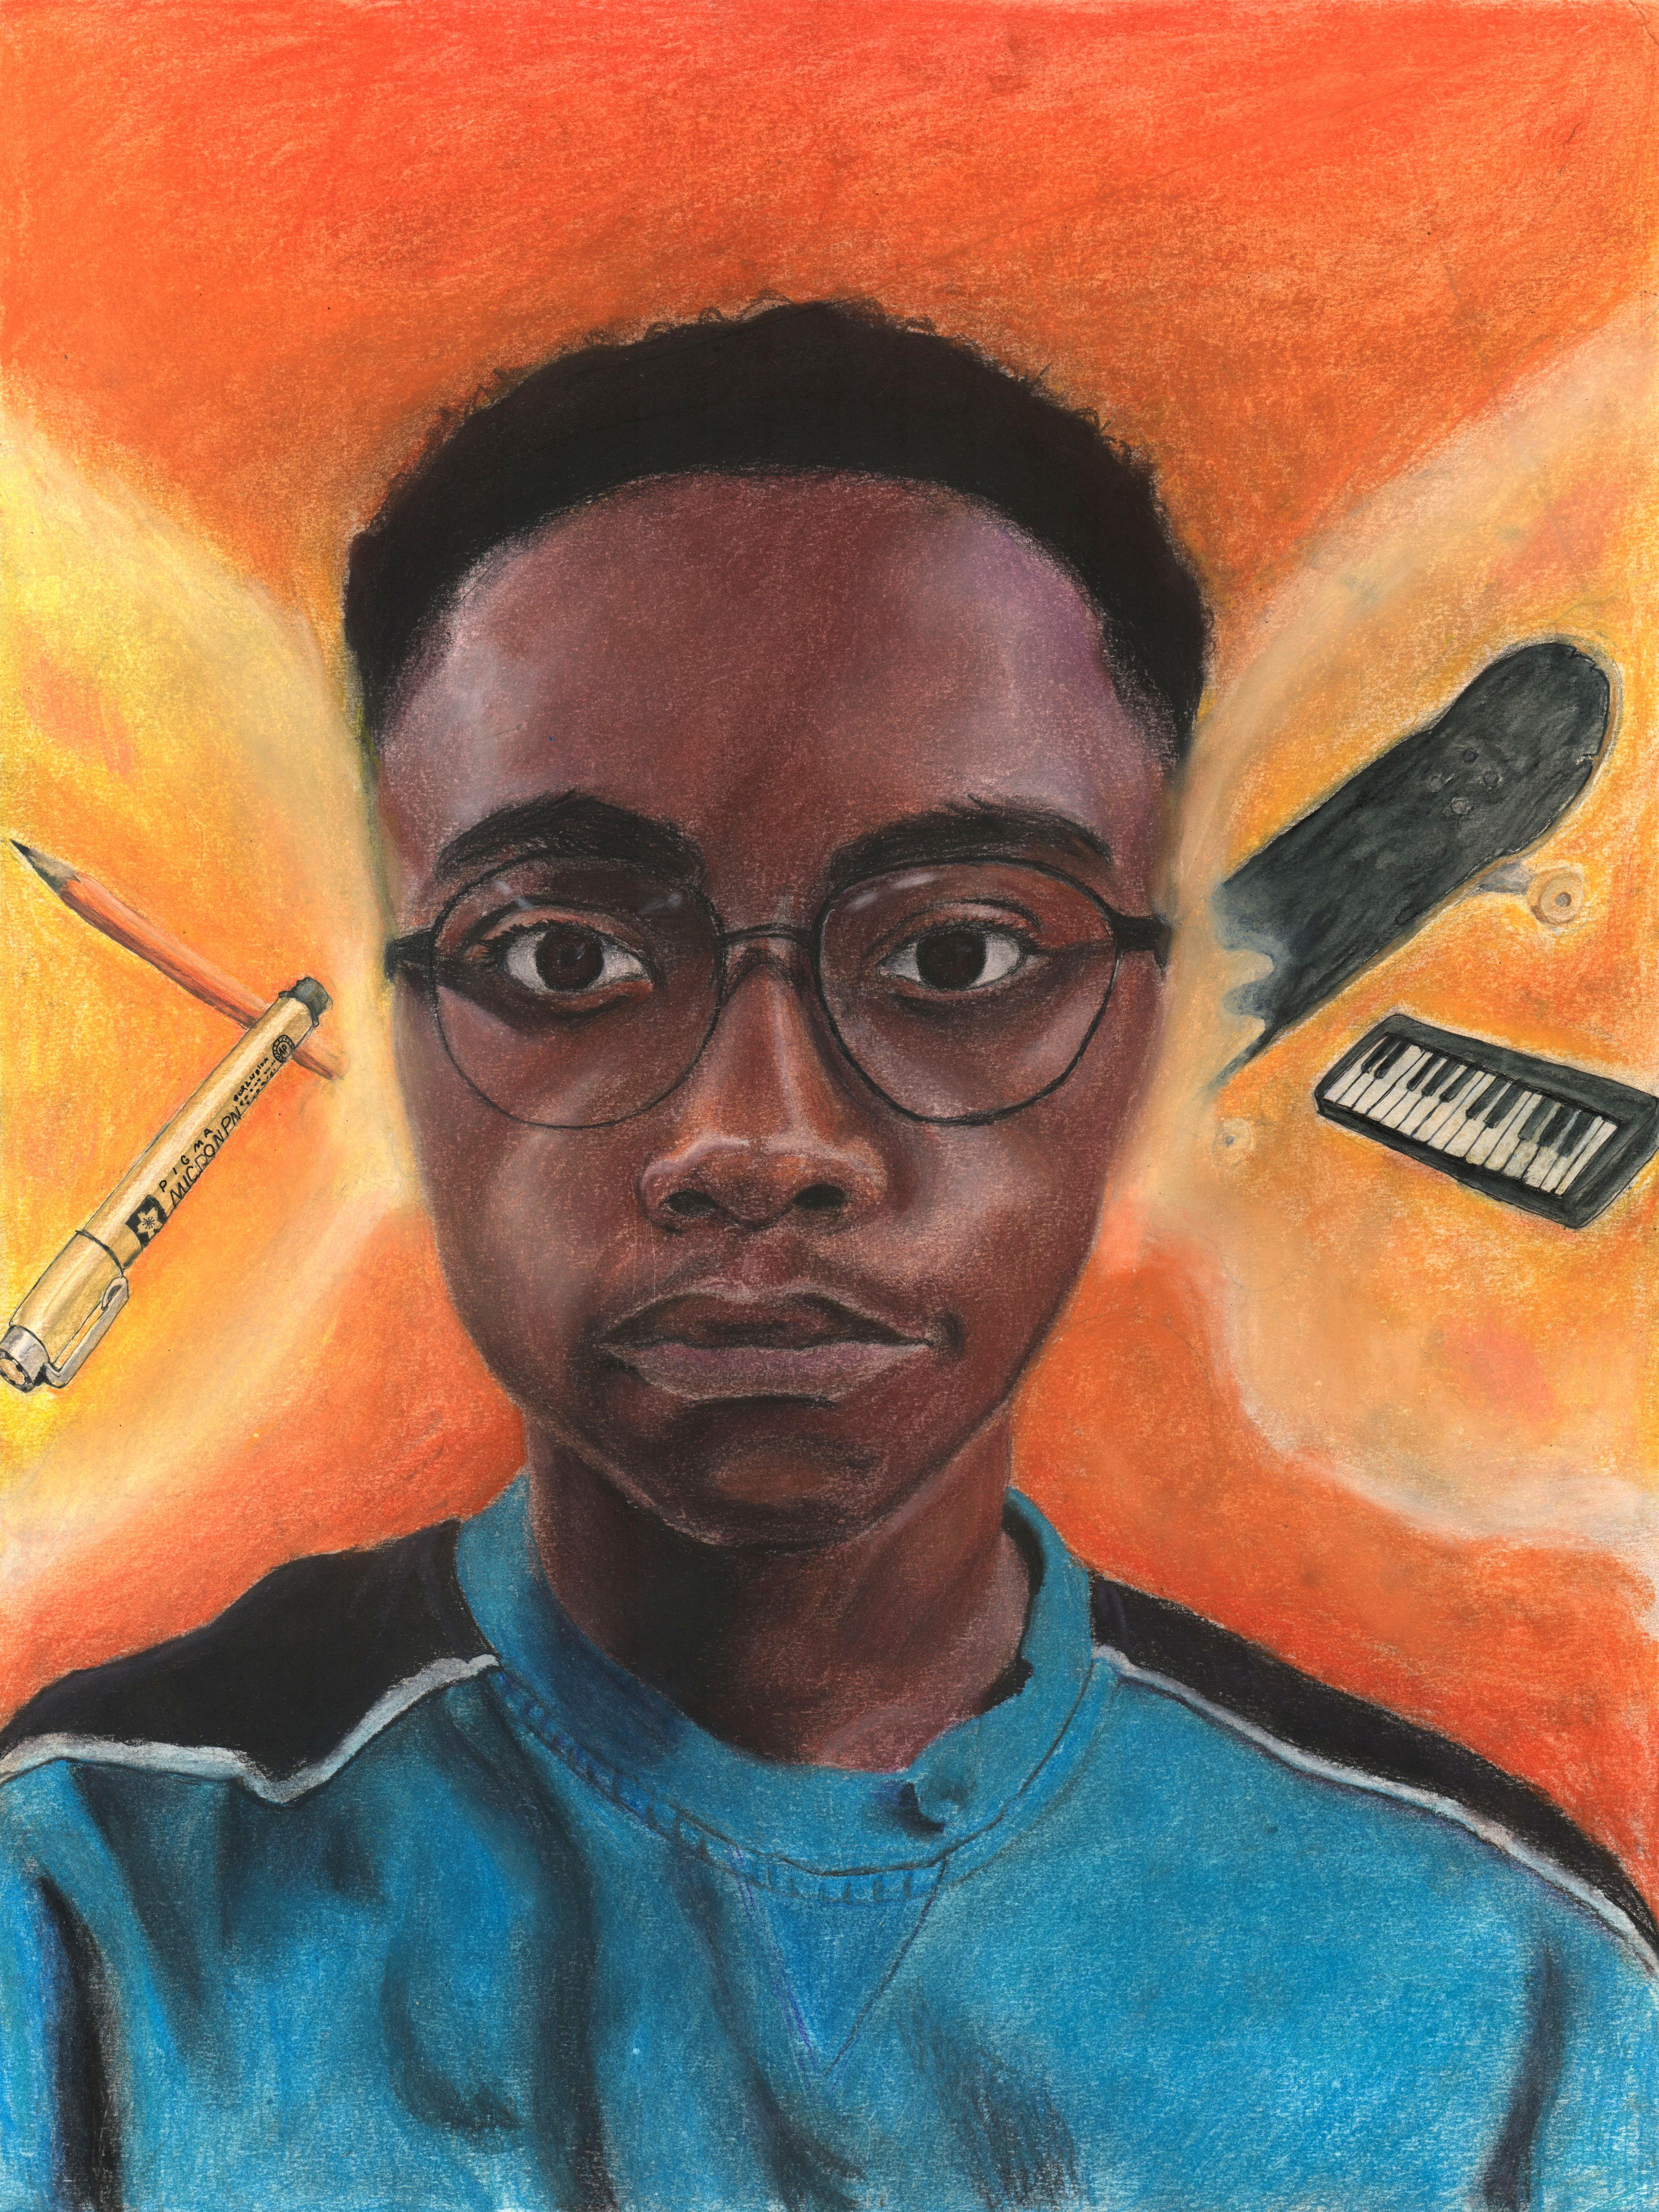 Conté crayon self-portrait of an adolescent Black male facing the viewer. He has short cropped black hair and wears large round glasses and a blue shirt with black trim on the shoulders. The subject appears in front of an orange-red background. Yellow rays extend and emanate from his ears. On the left, a technical pen and pencil seem to float and emerge from his right ear. On the right, a miniature black skateboard and electronic musical keyboard seem to extend from his left ear.